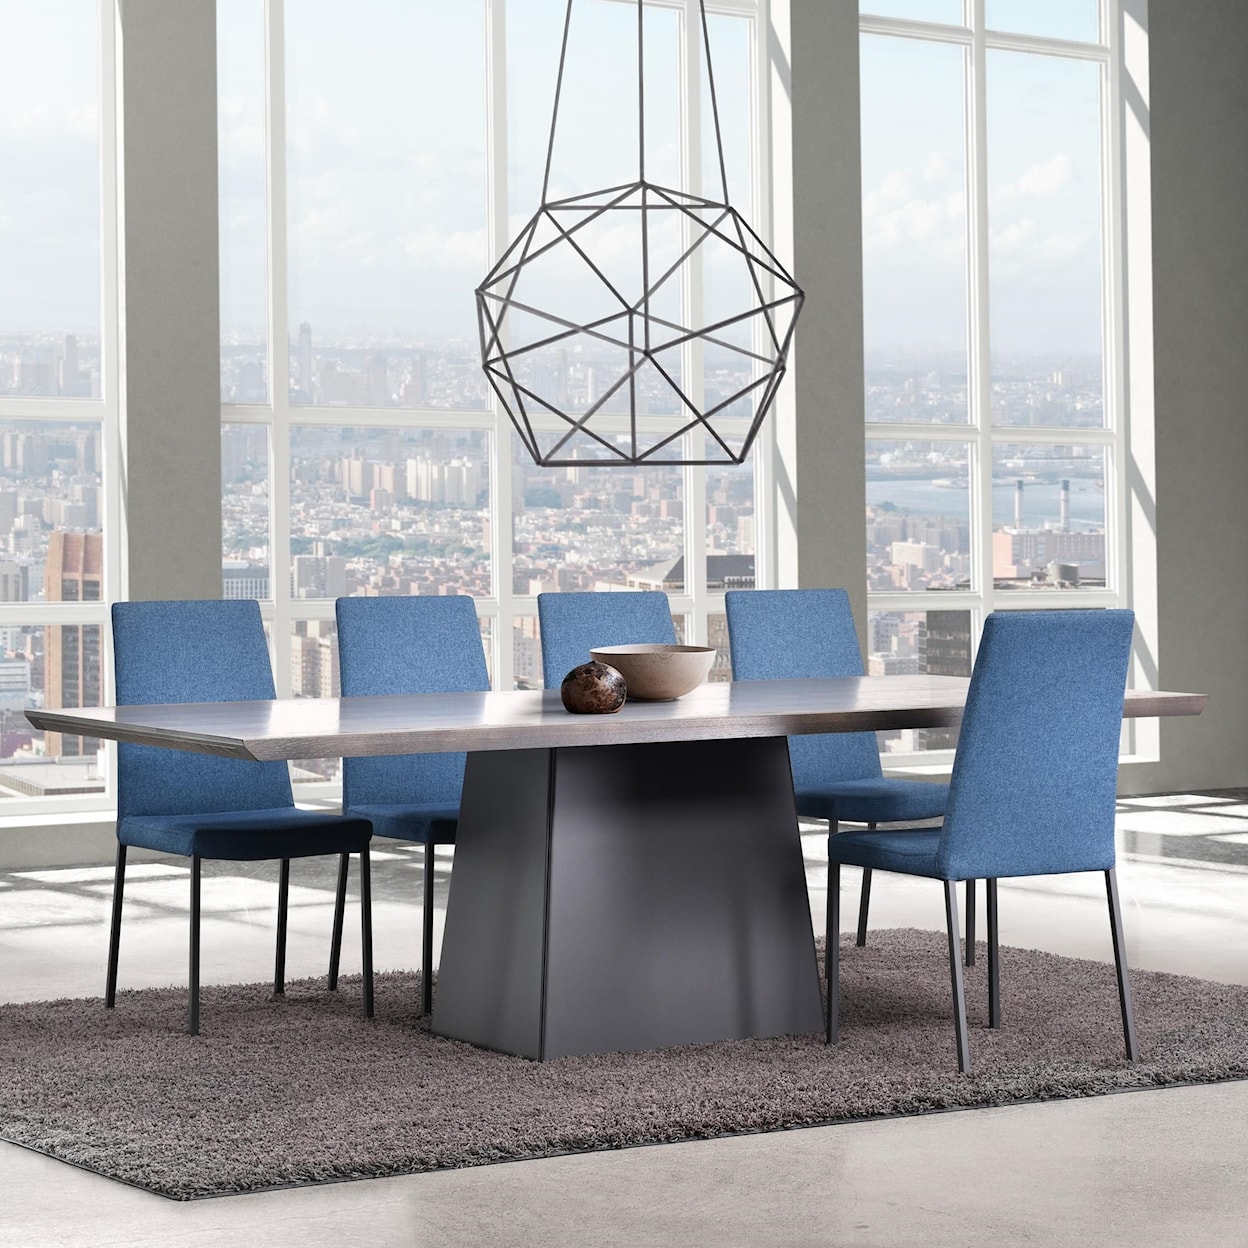 Trica Contemporary Tables Sculpture Dining Table